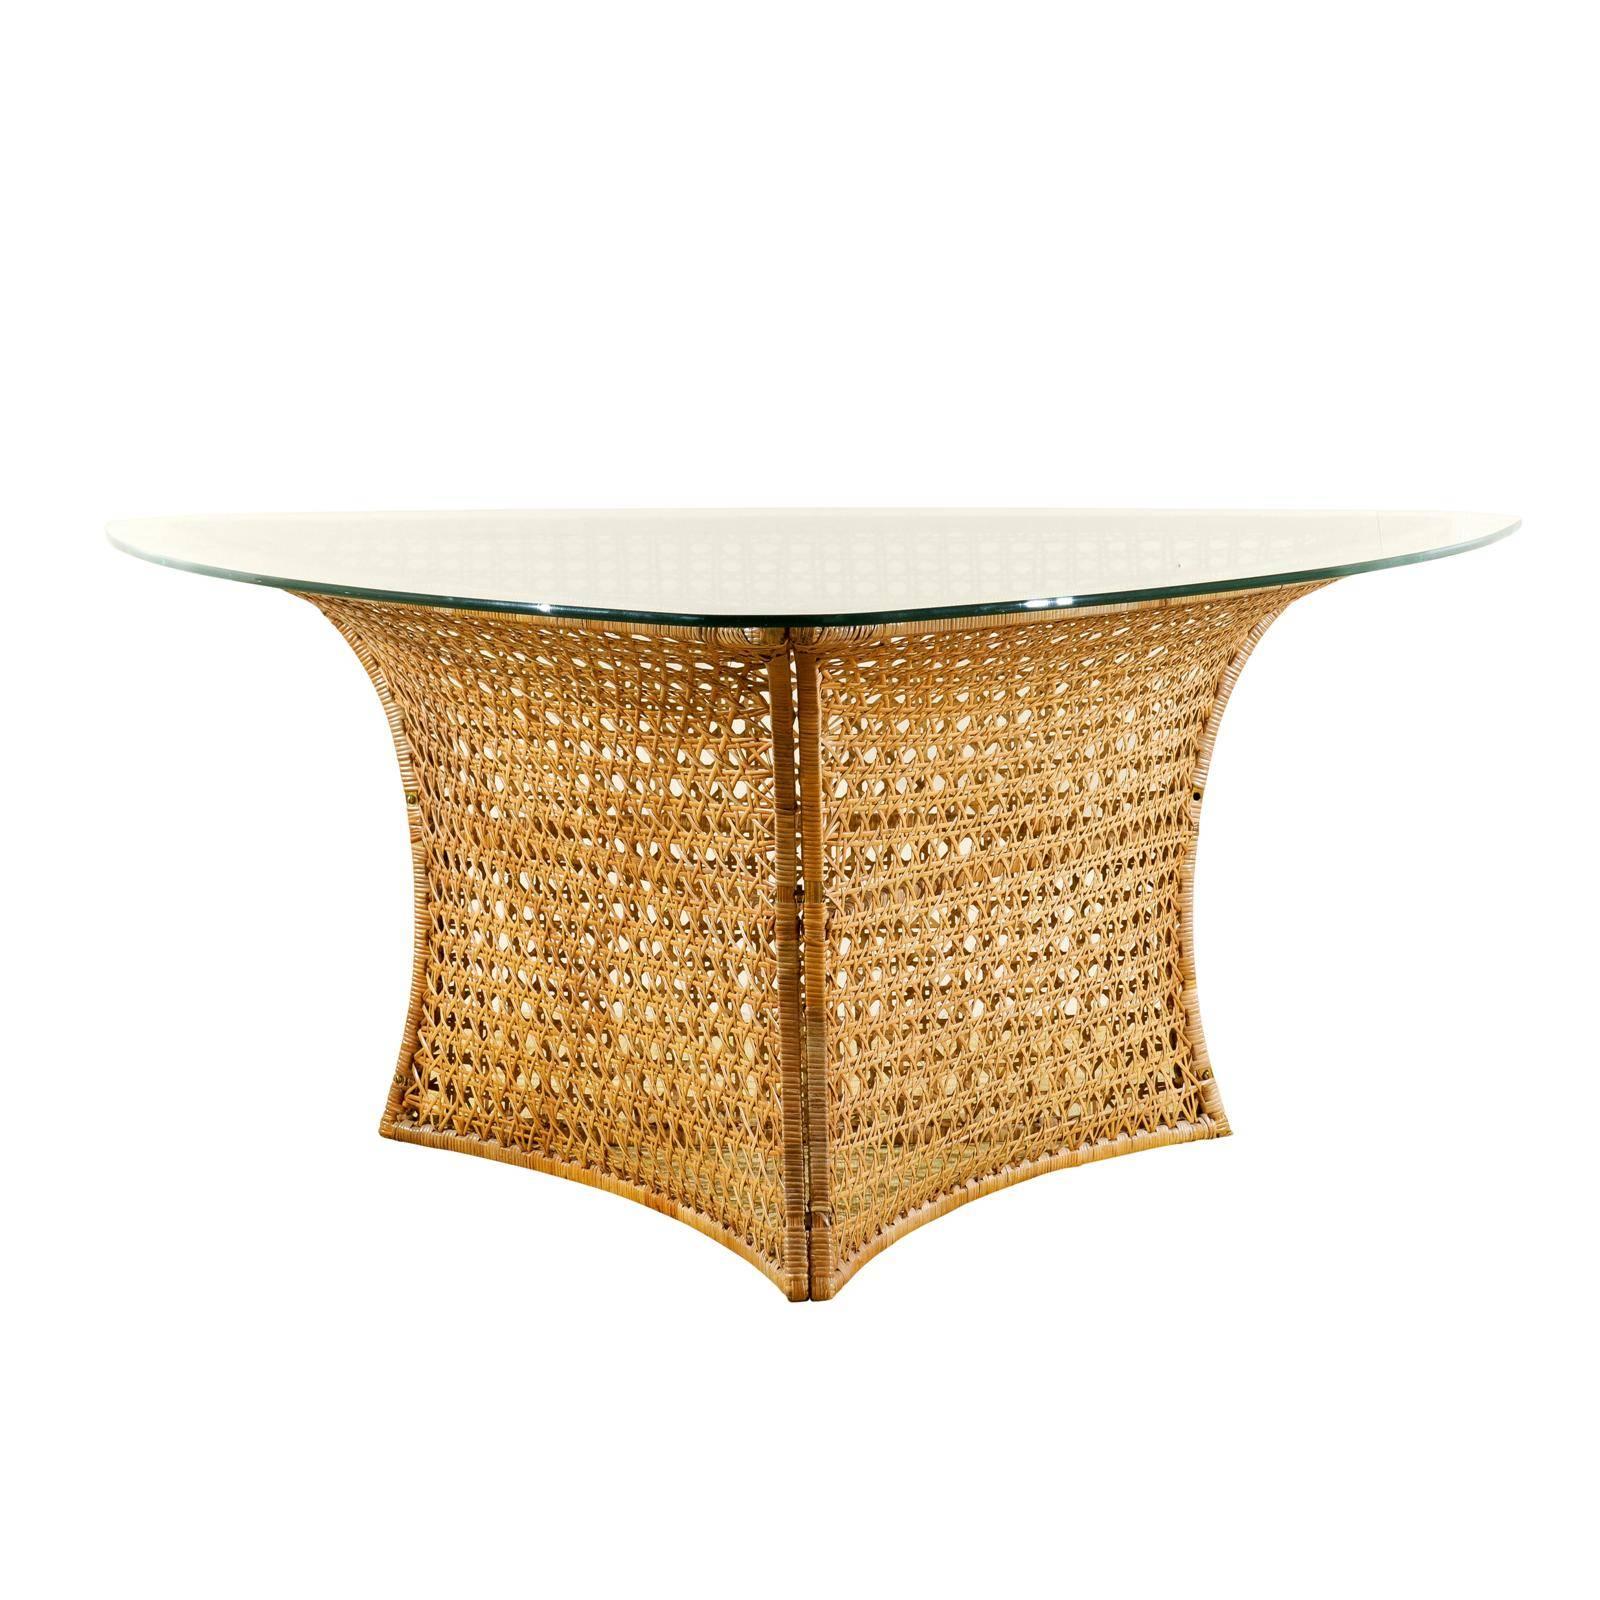 Fantastic Rattan Triangle Base Dining or Game Table by Danny Ho Fong, circa 1975